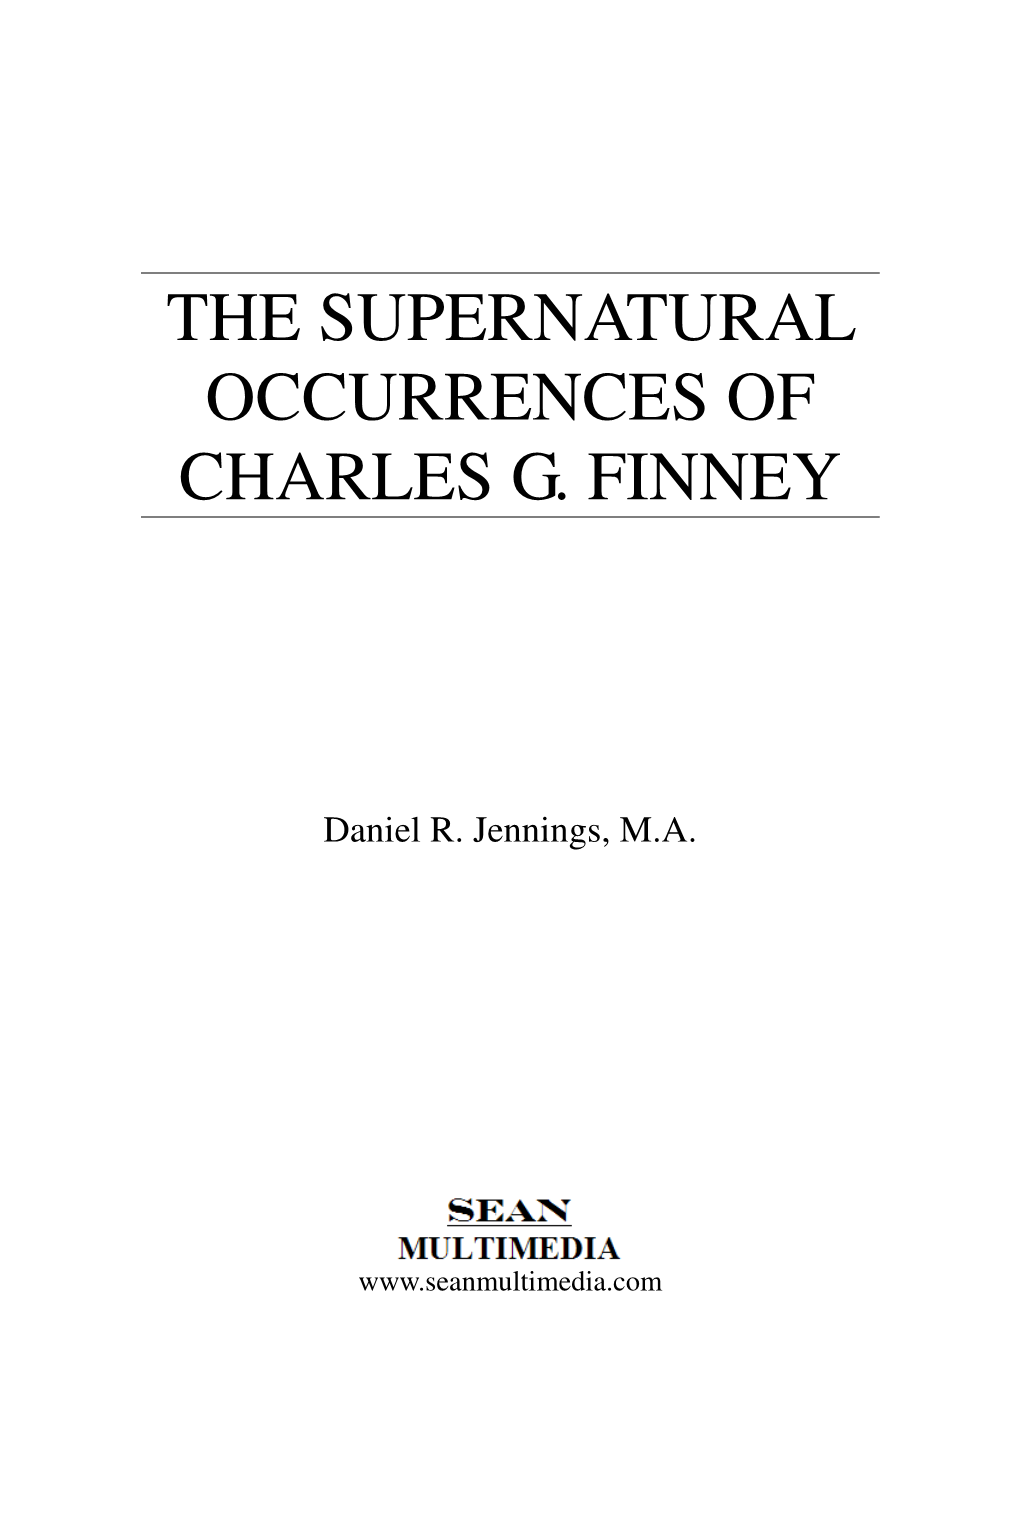 The Supernatural Occurrences of Charles G